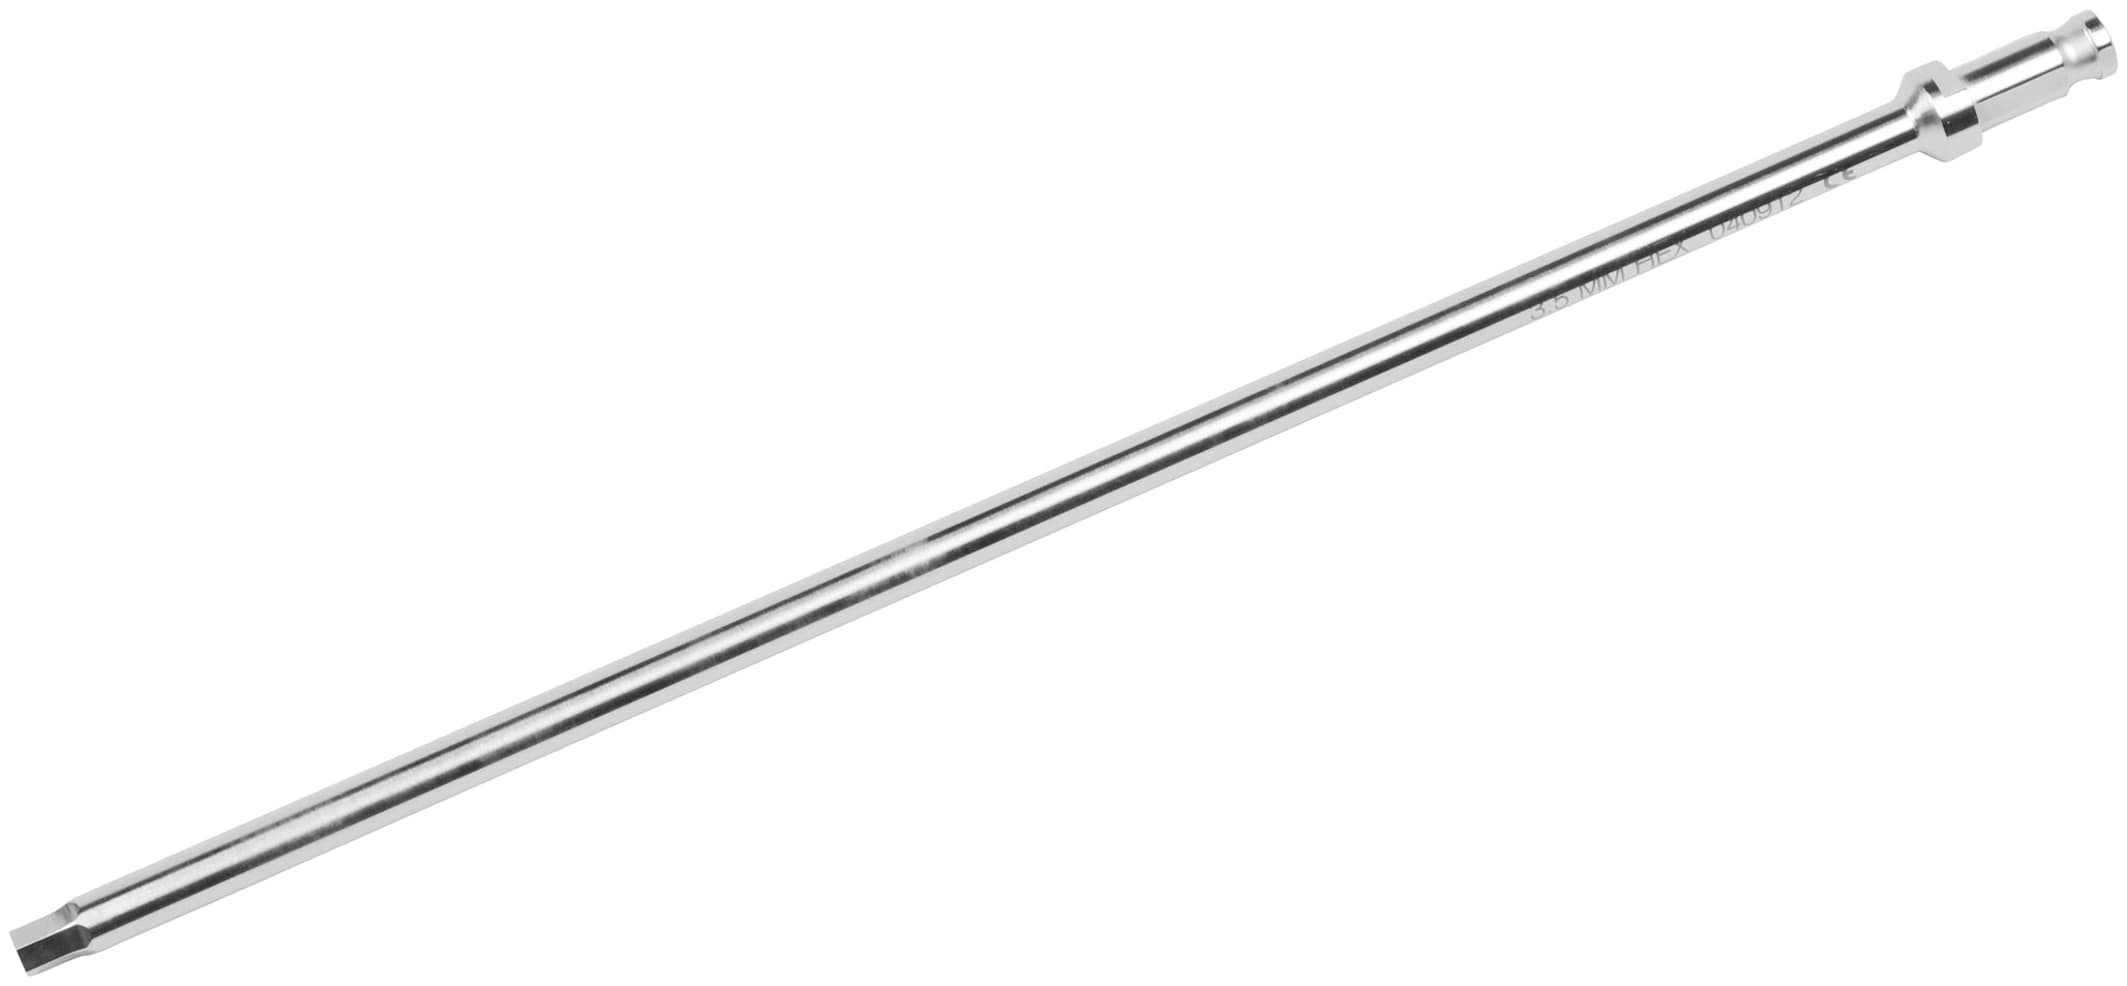 Hex Driver, 3.5 mm